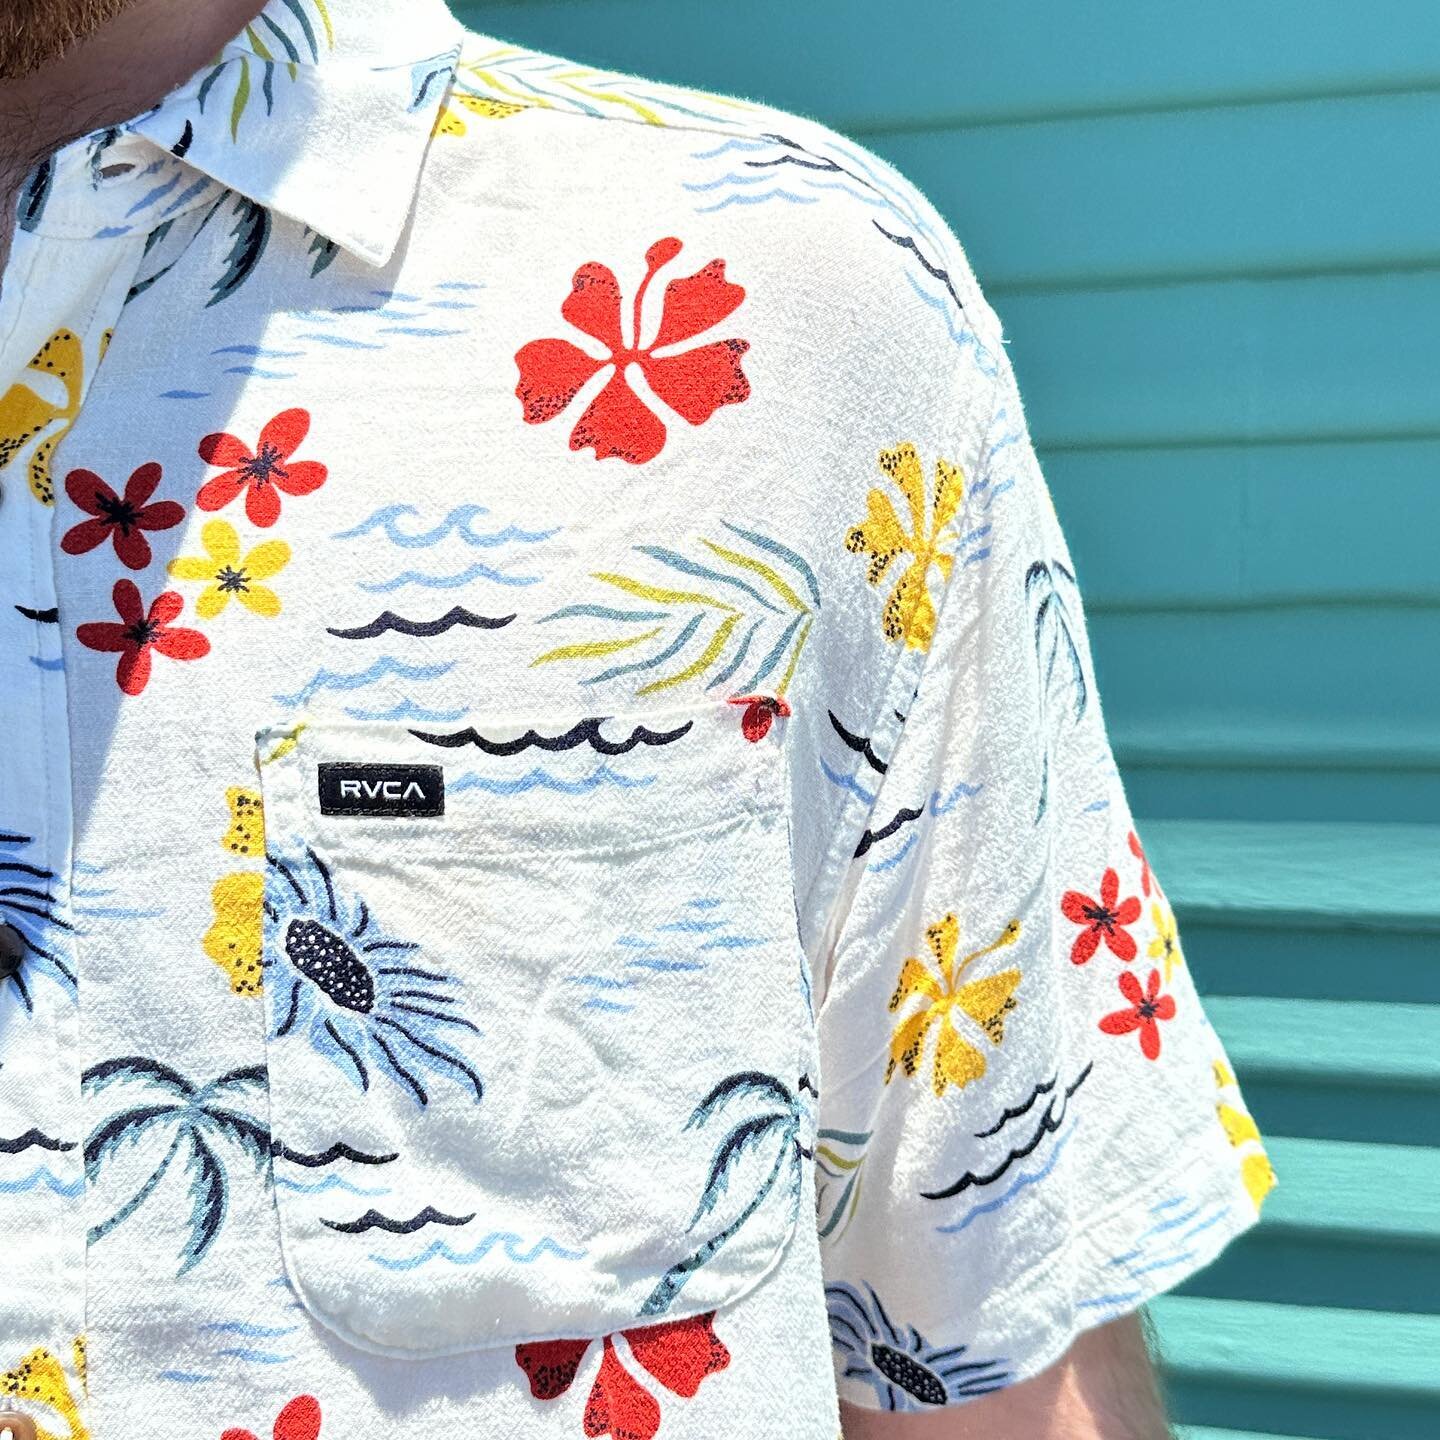 Benjamin&rsquo;s has you covered if you wanna look nice and stay cool this summer!! Come check out our button ups from RVCA and lots of other brands! 👕☀️#benjamins #rvca #shoplocal #cctx #surf #sk8 #surf #surfshop #fyp #springootd #skateshop #smallb